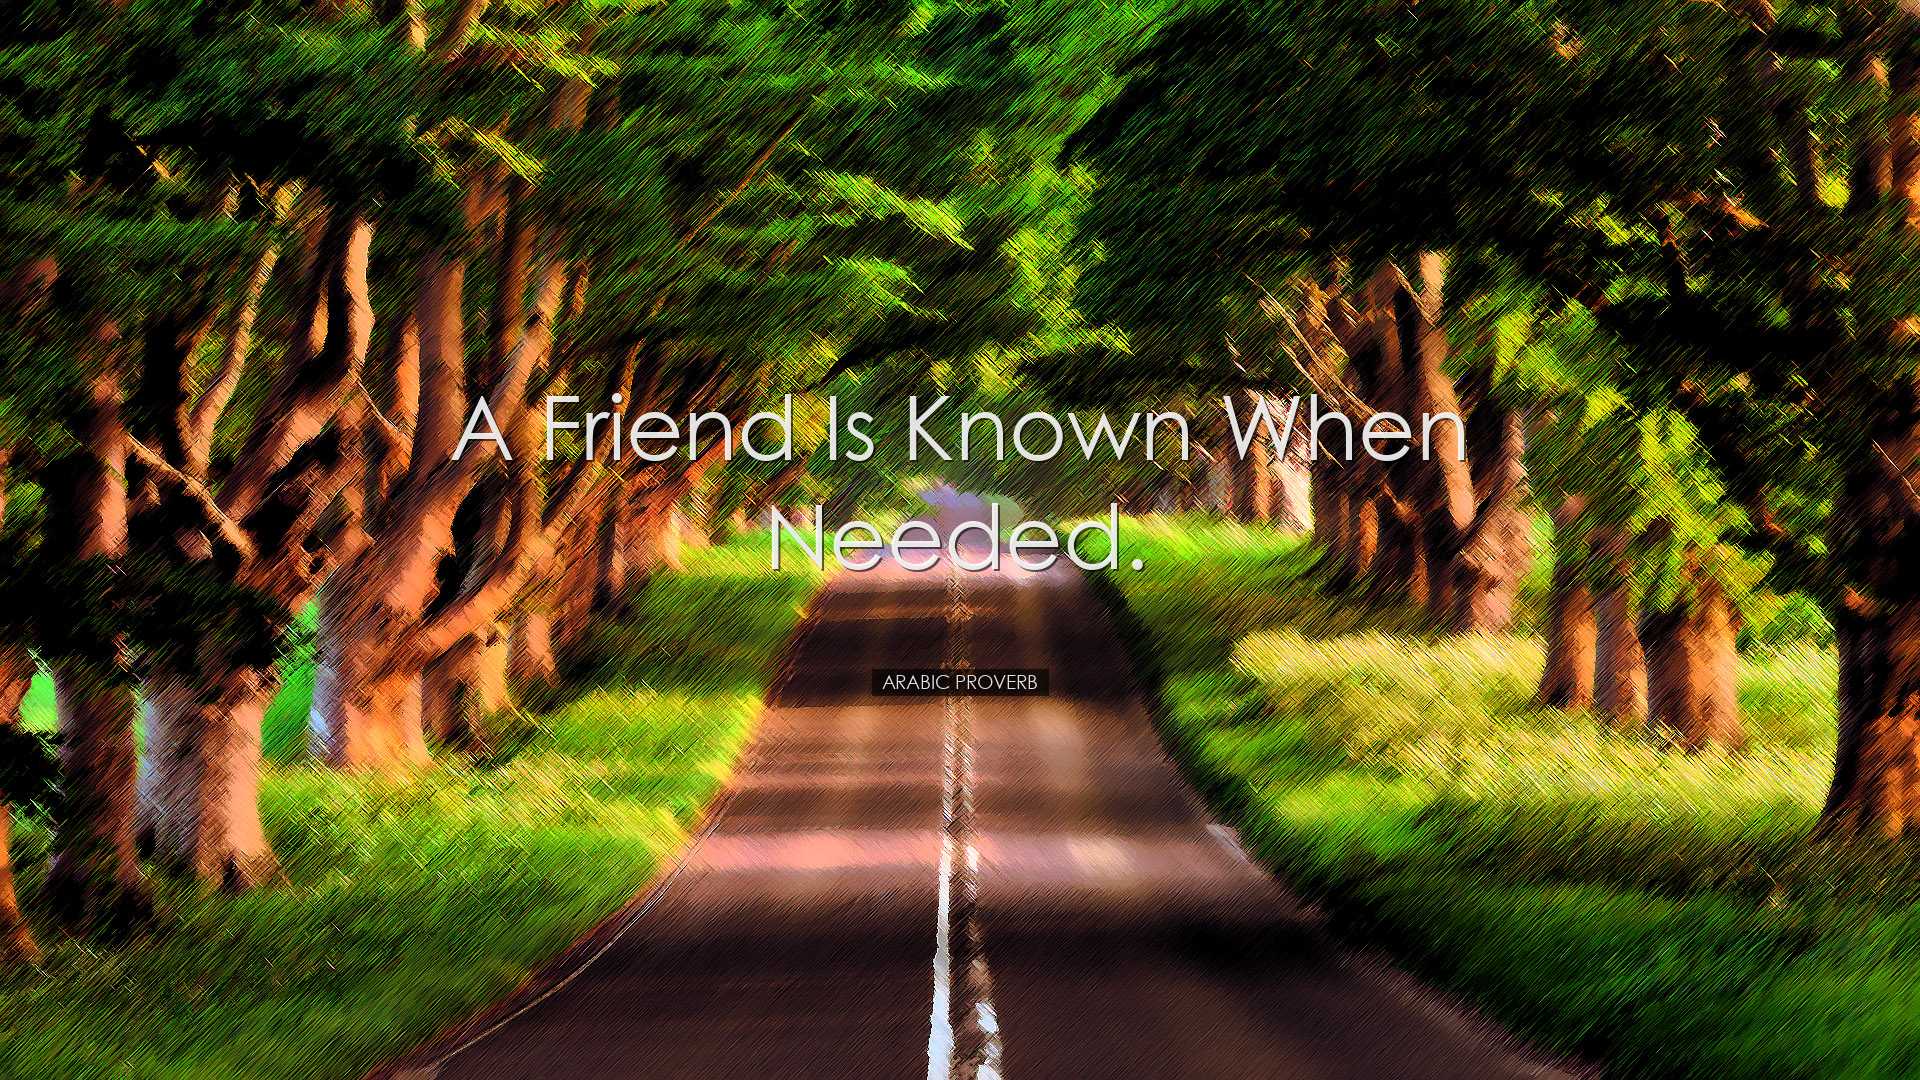 A friend is known when needed. - Arabic Proverb